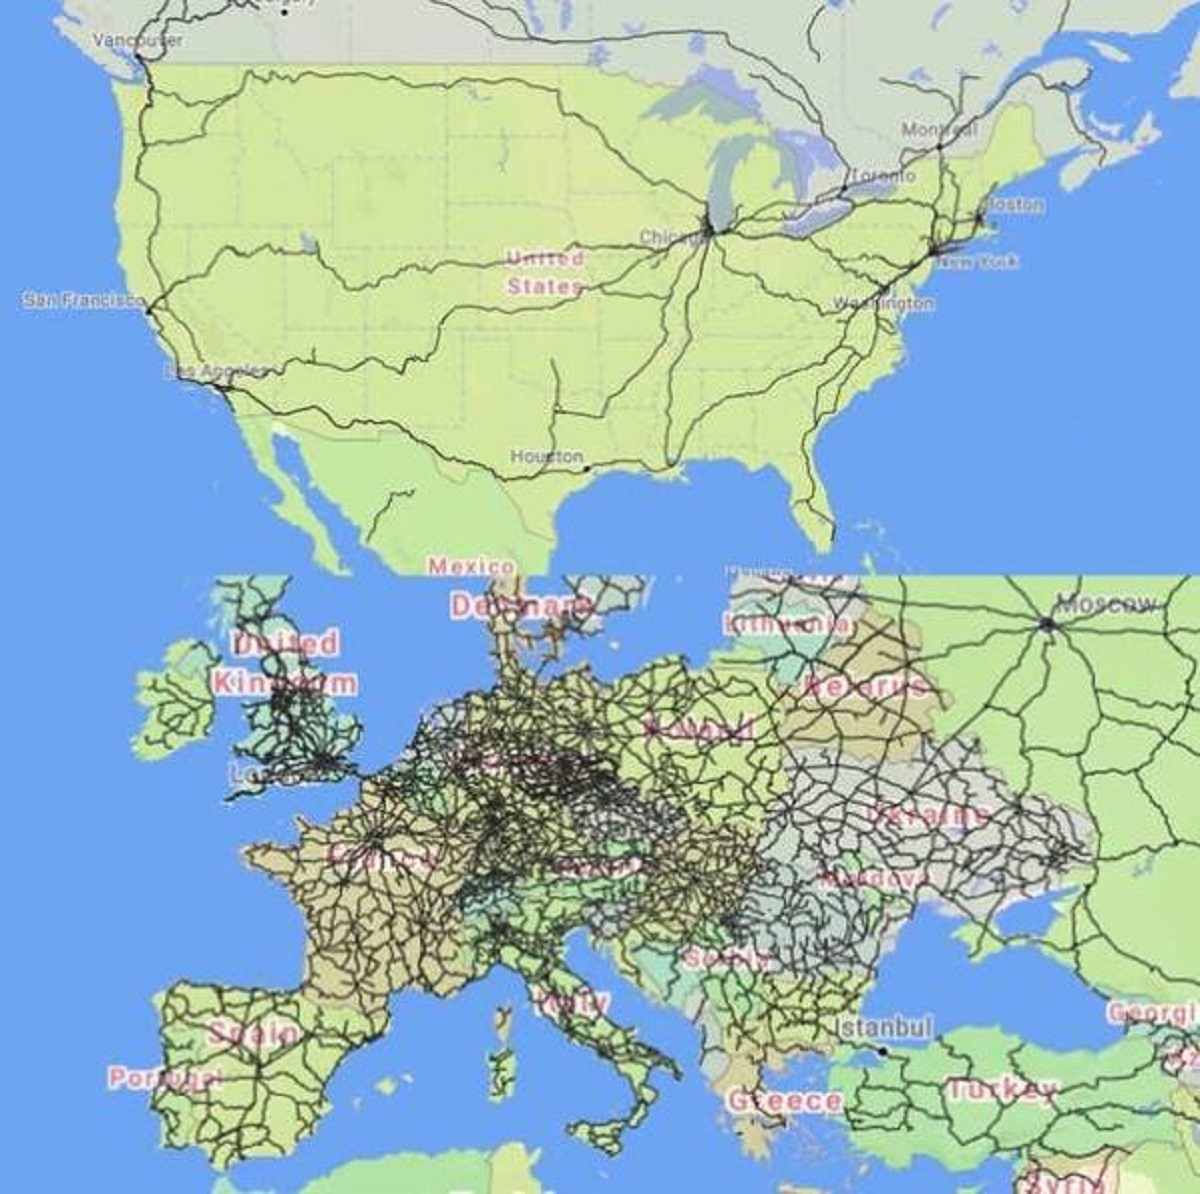 This is roughly how many passenger trains there are in the USA compared with Europe: